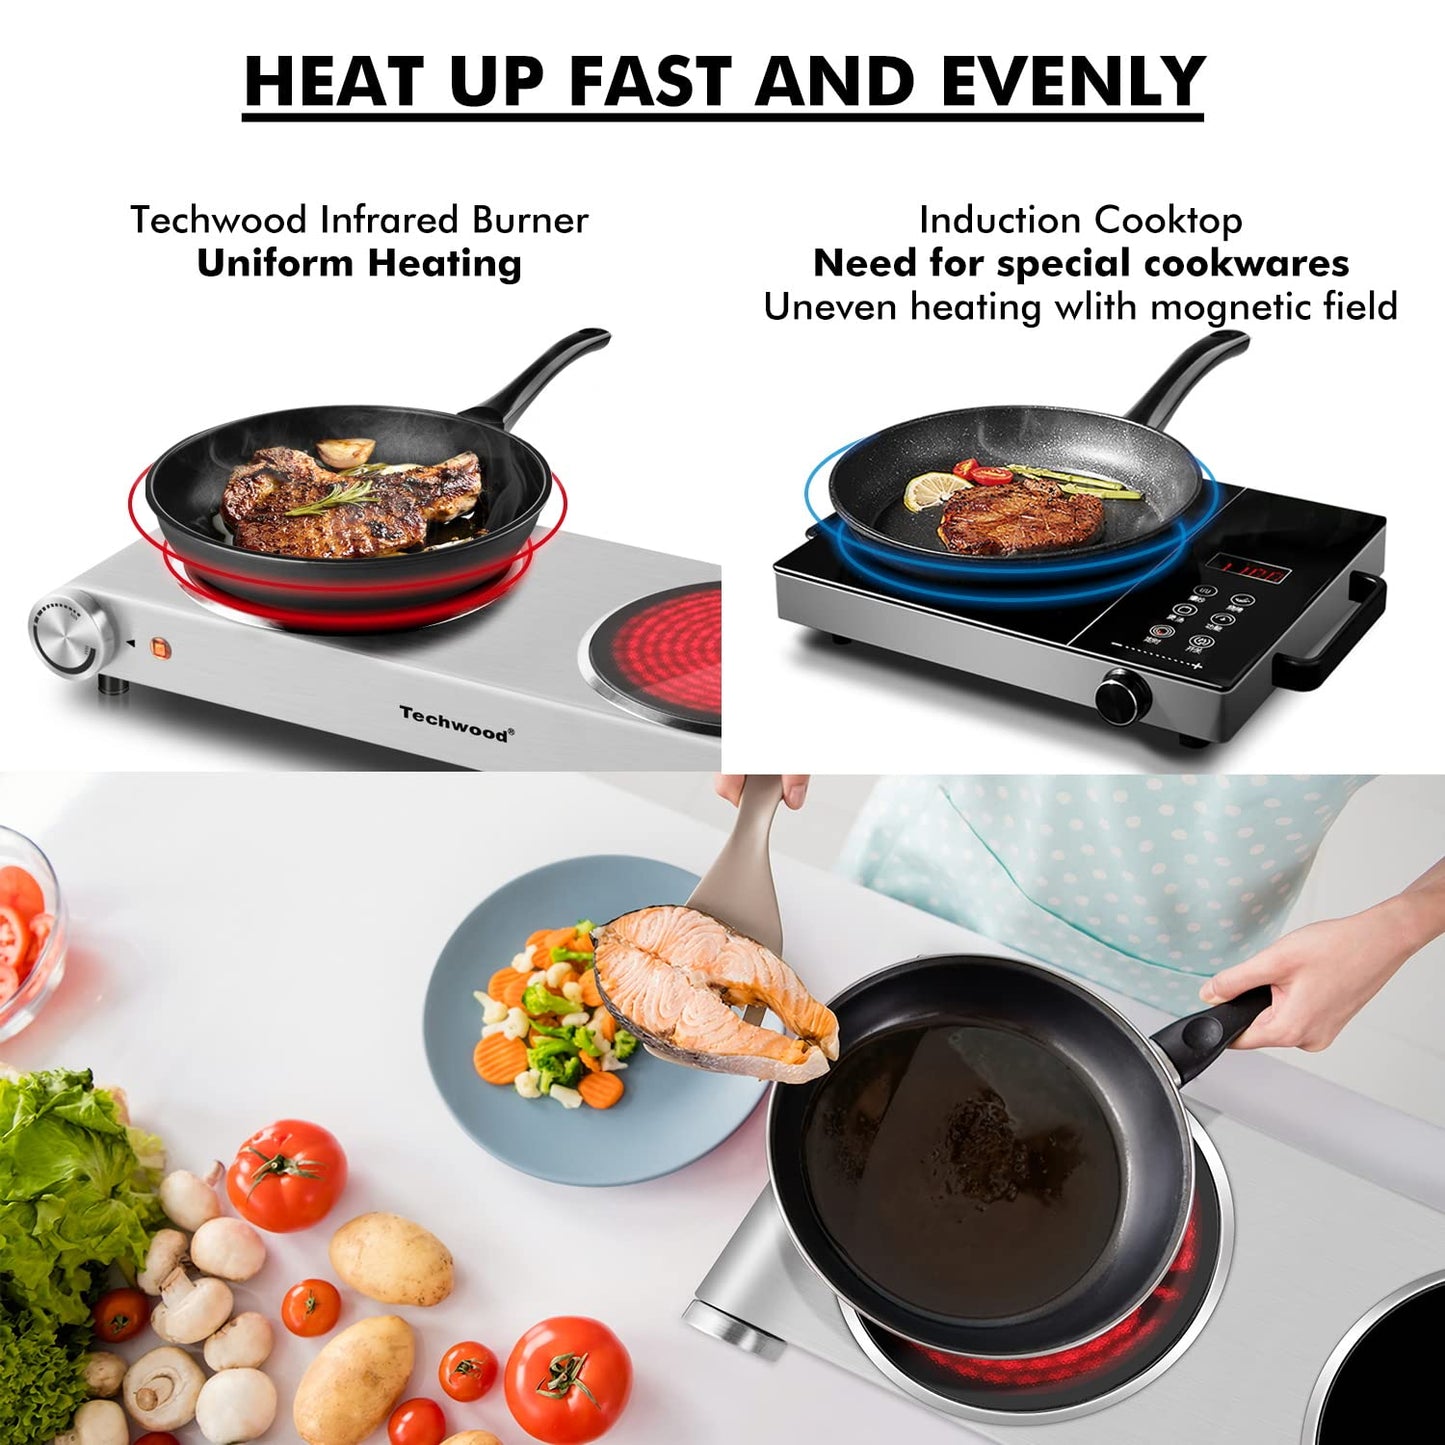 900W+900W Double Hot Plates, Cast Iron hot plates, Electric Cooktop, Hot  Plates for Cooking Portable Electric Double Burner, Black Stainless Steel  Countertop Burner, Easy to Clean-Upgraded Version 